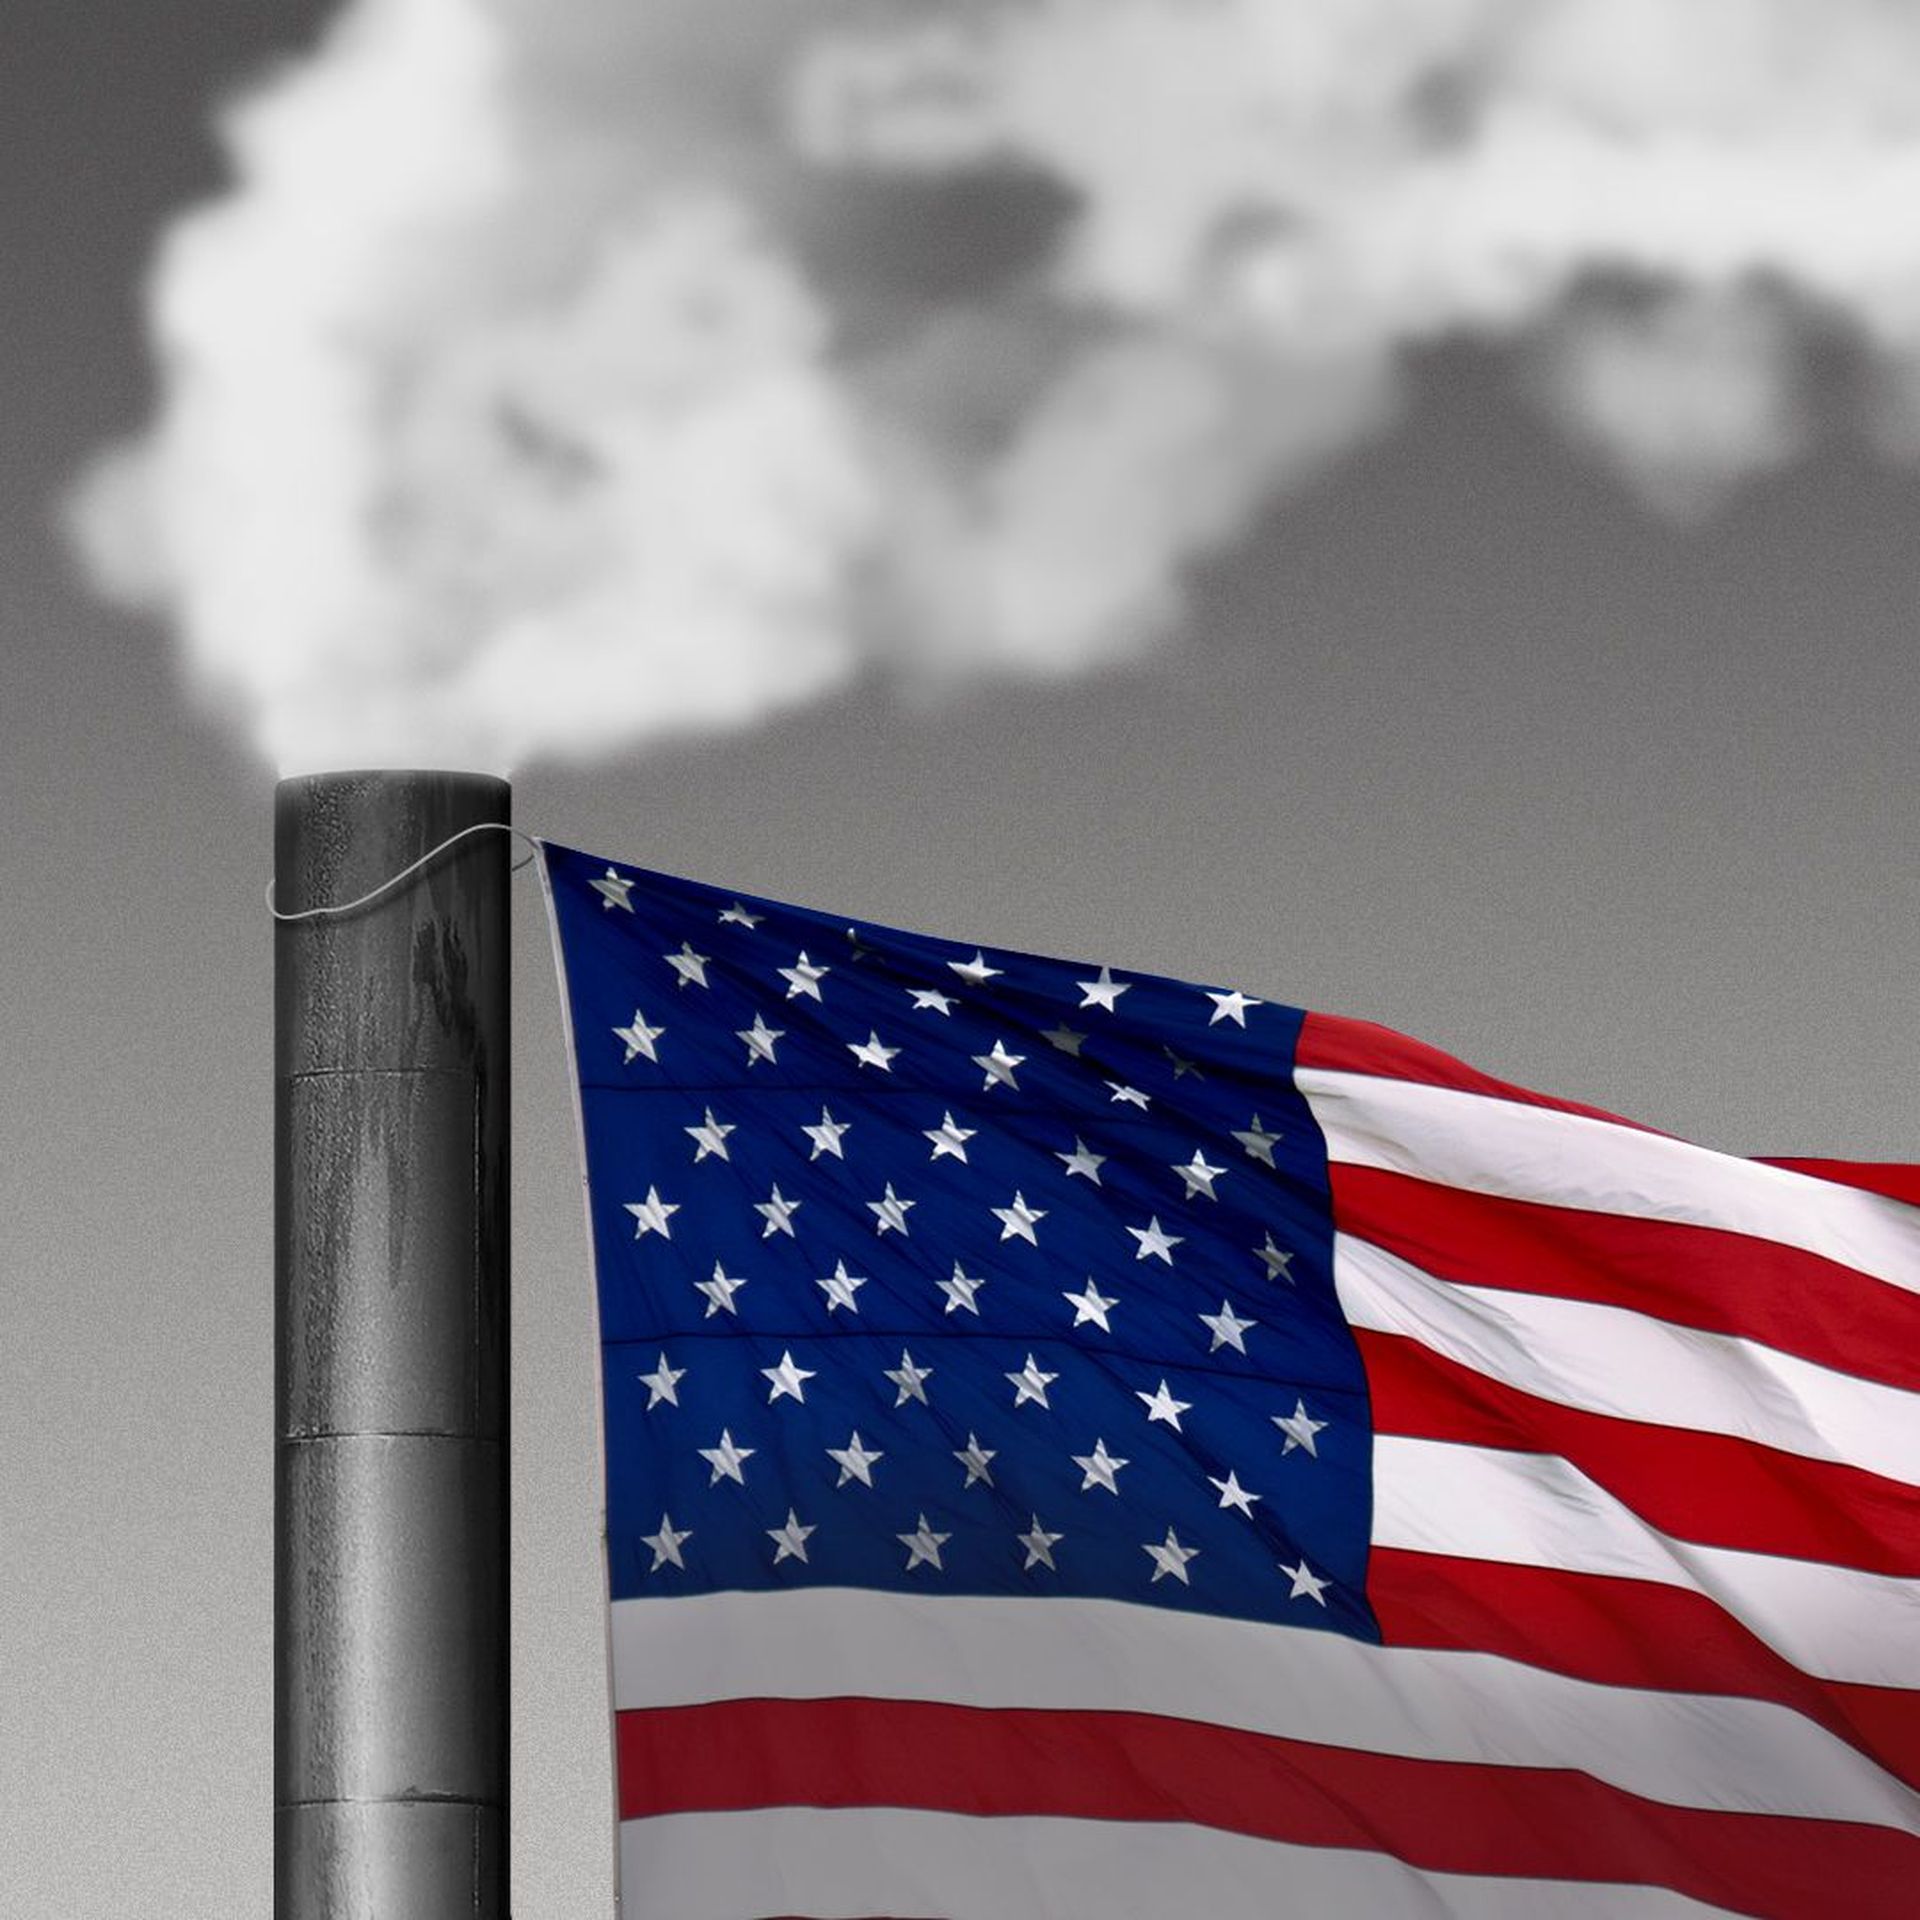 Illustration of a smokestack with an American flag on it.